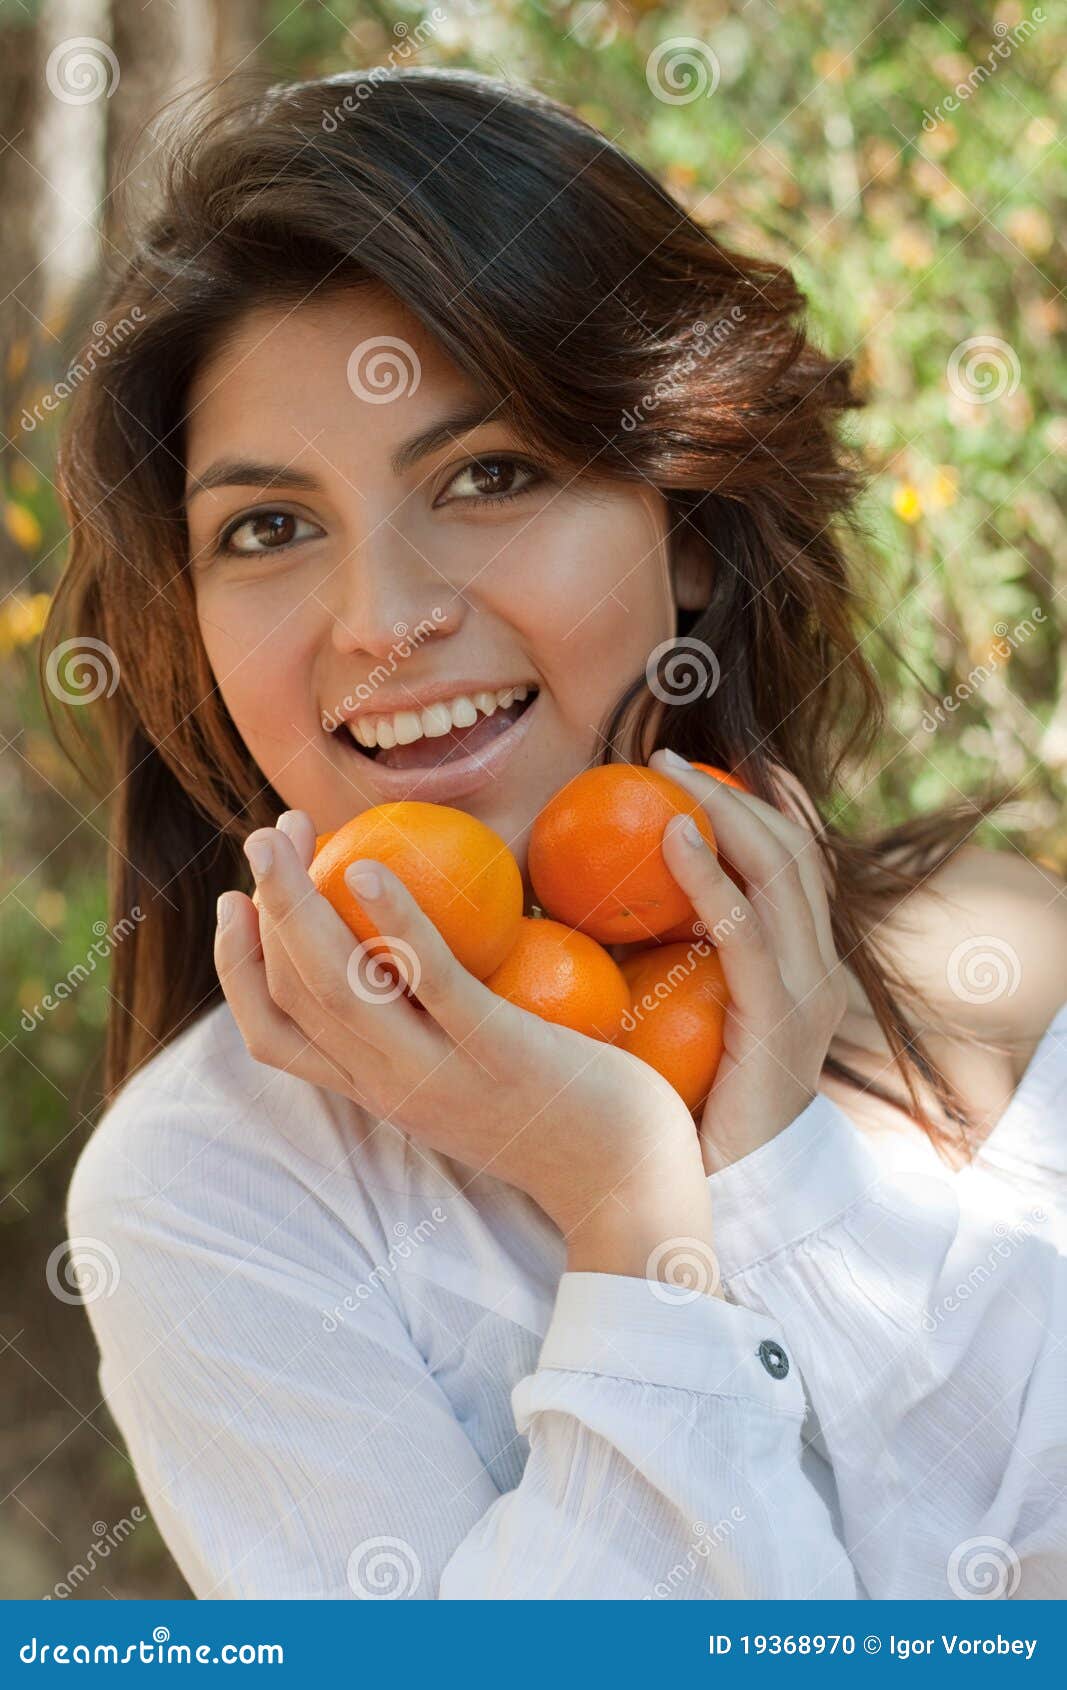 Smiling Young Spanish Girl With A Tangerine Stock Photo ...